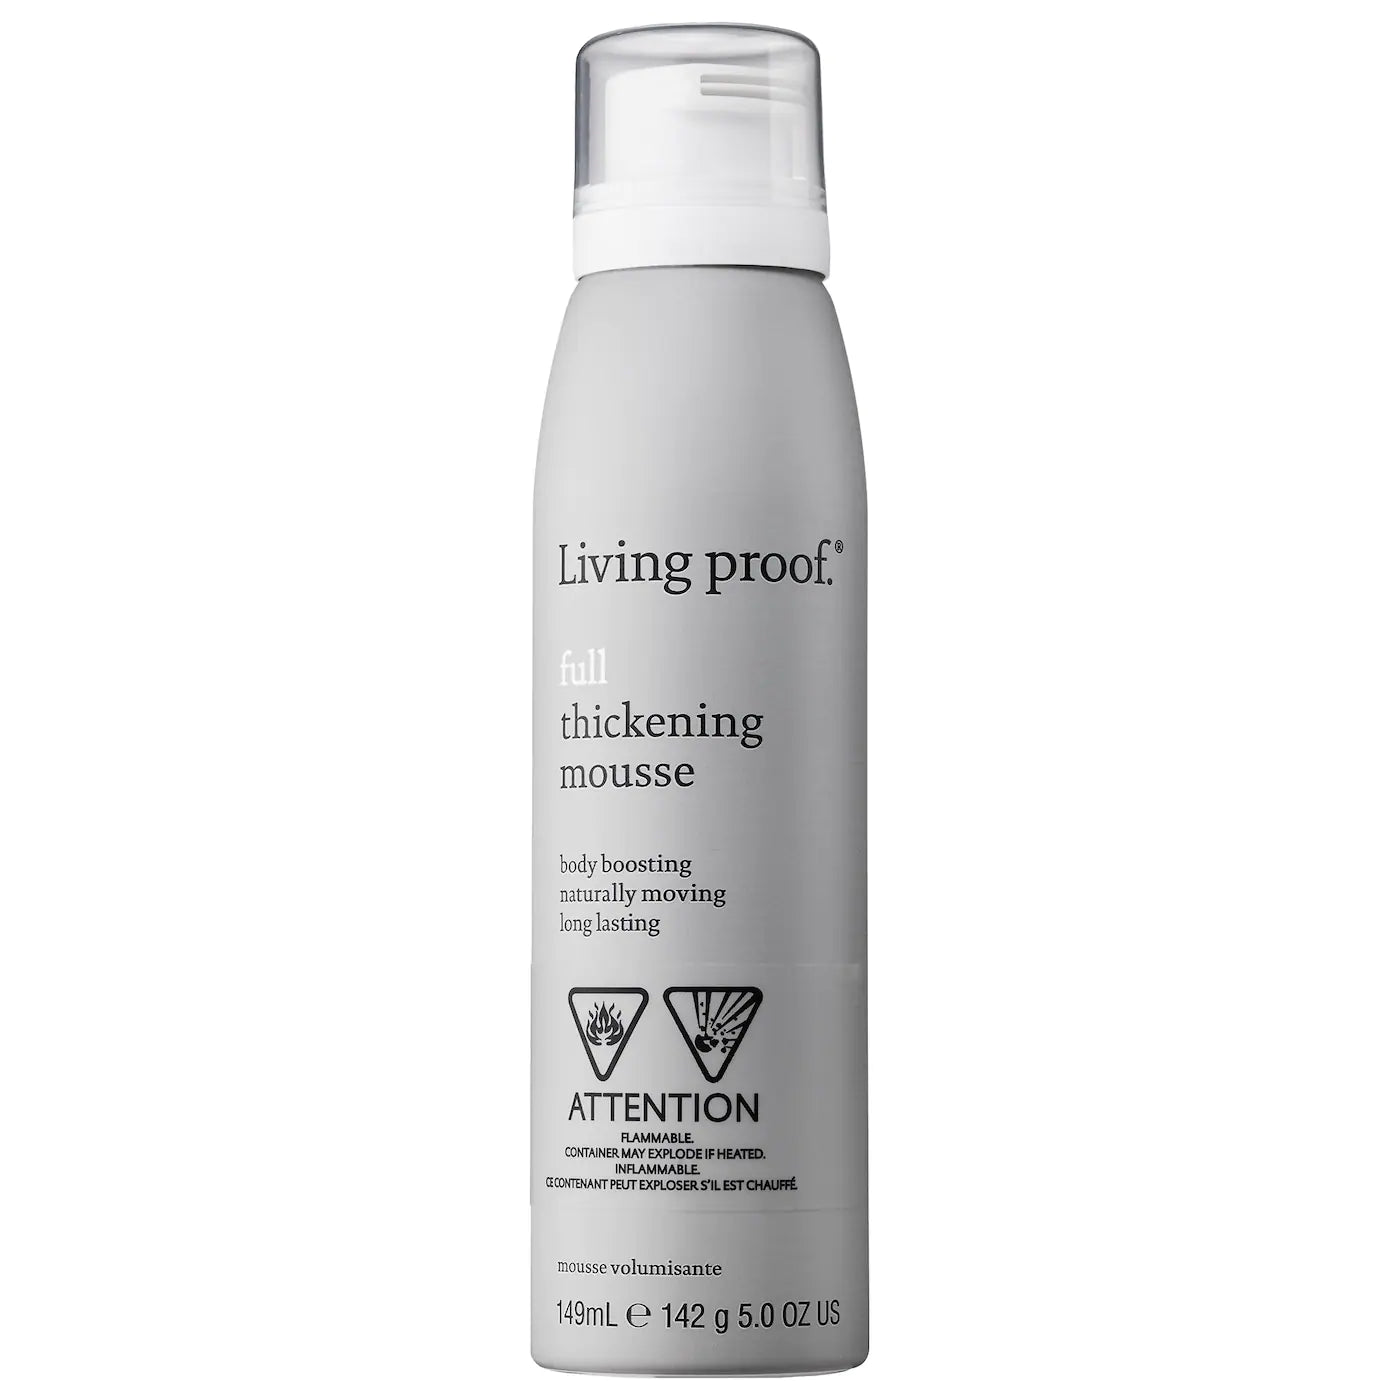 Living Proof Full Thickening Mousse - 149mL